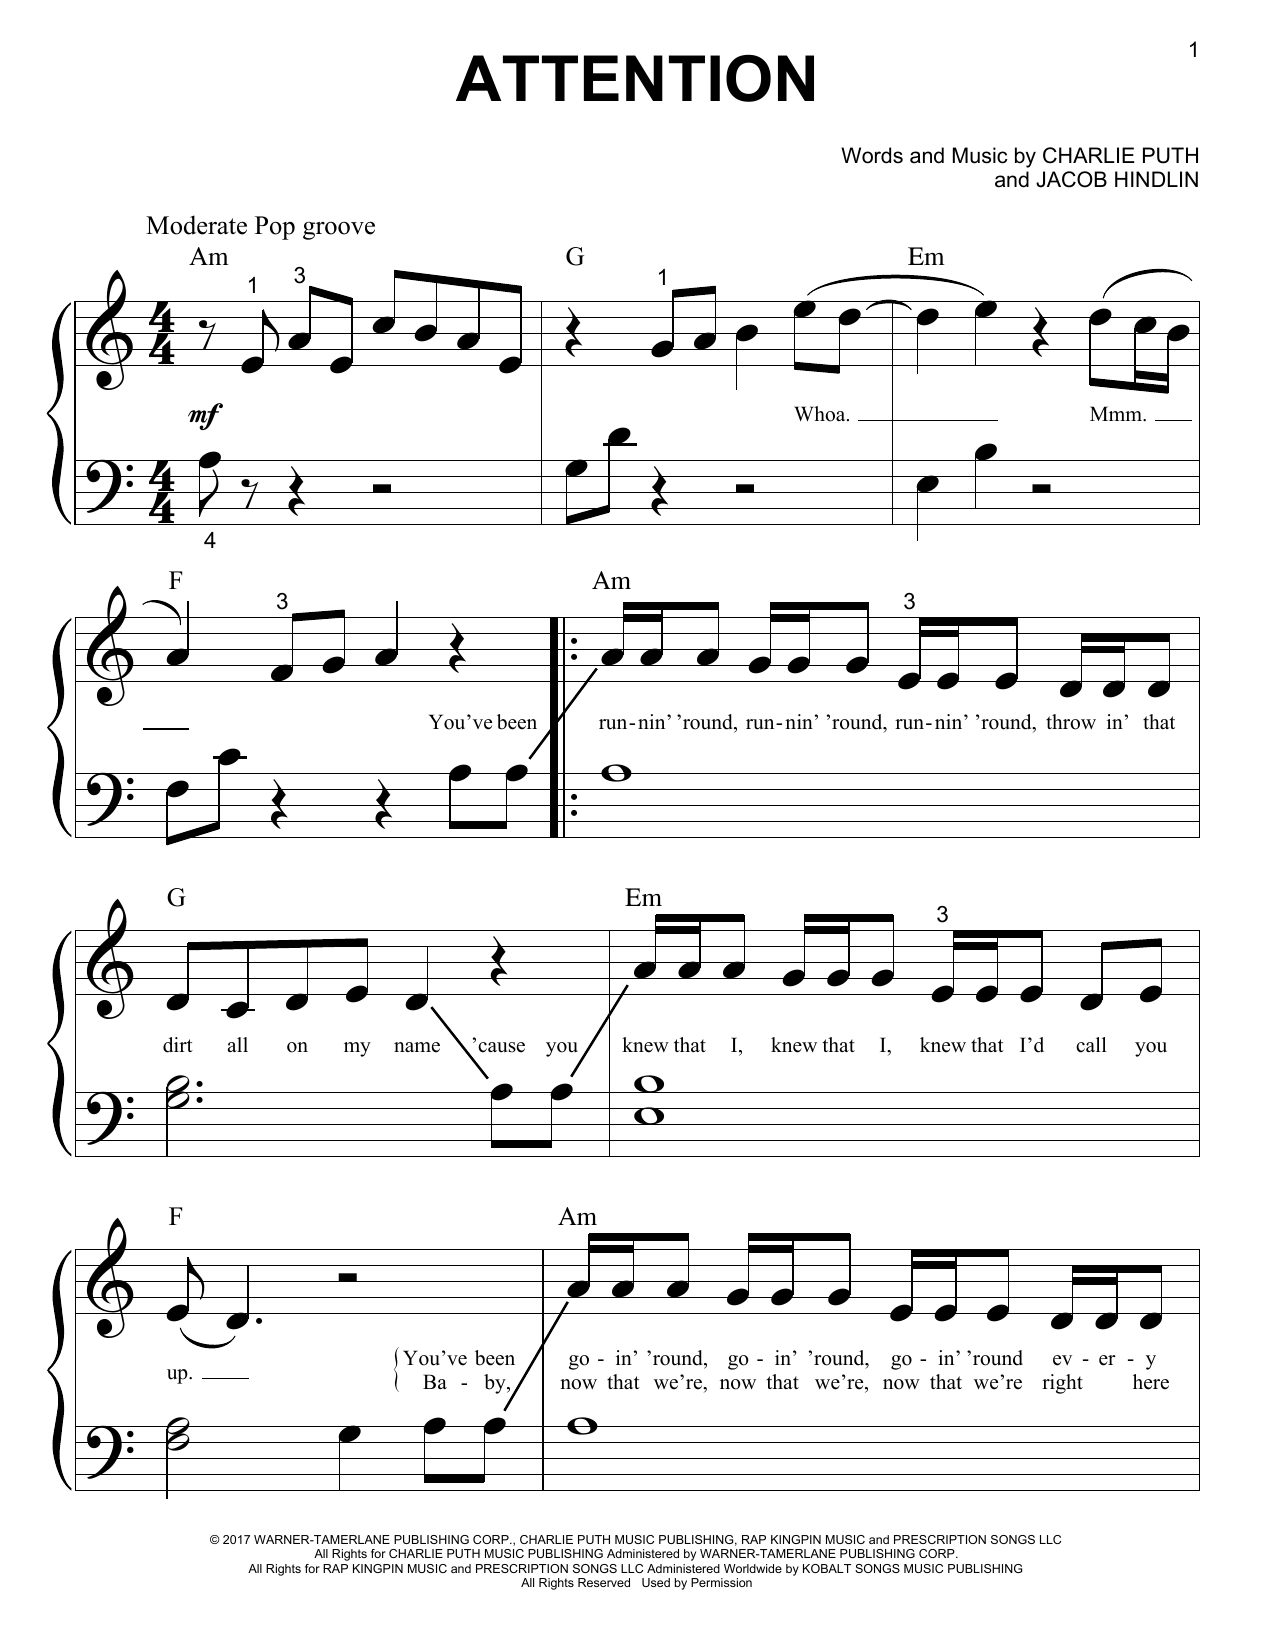 Download Charlie Puth Attention Sheet Music